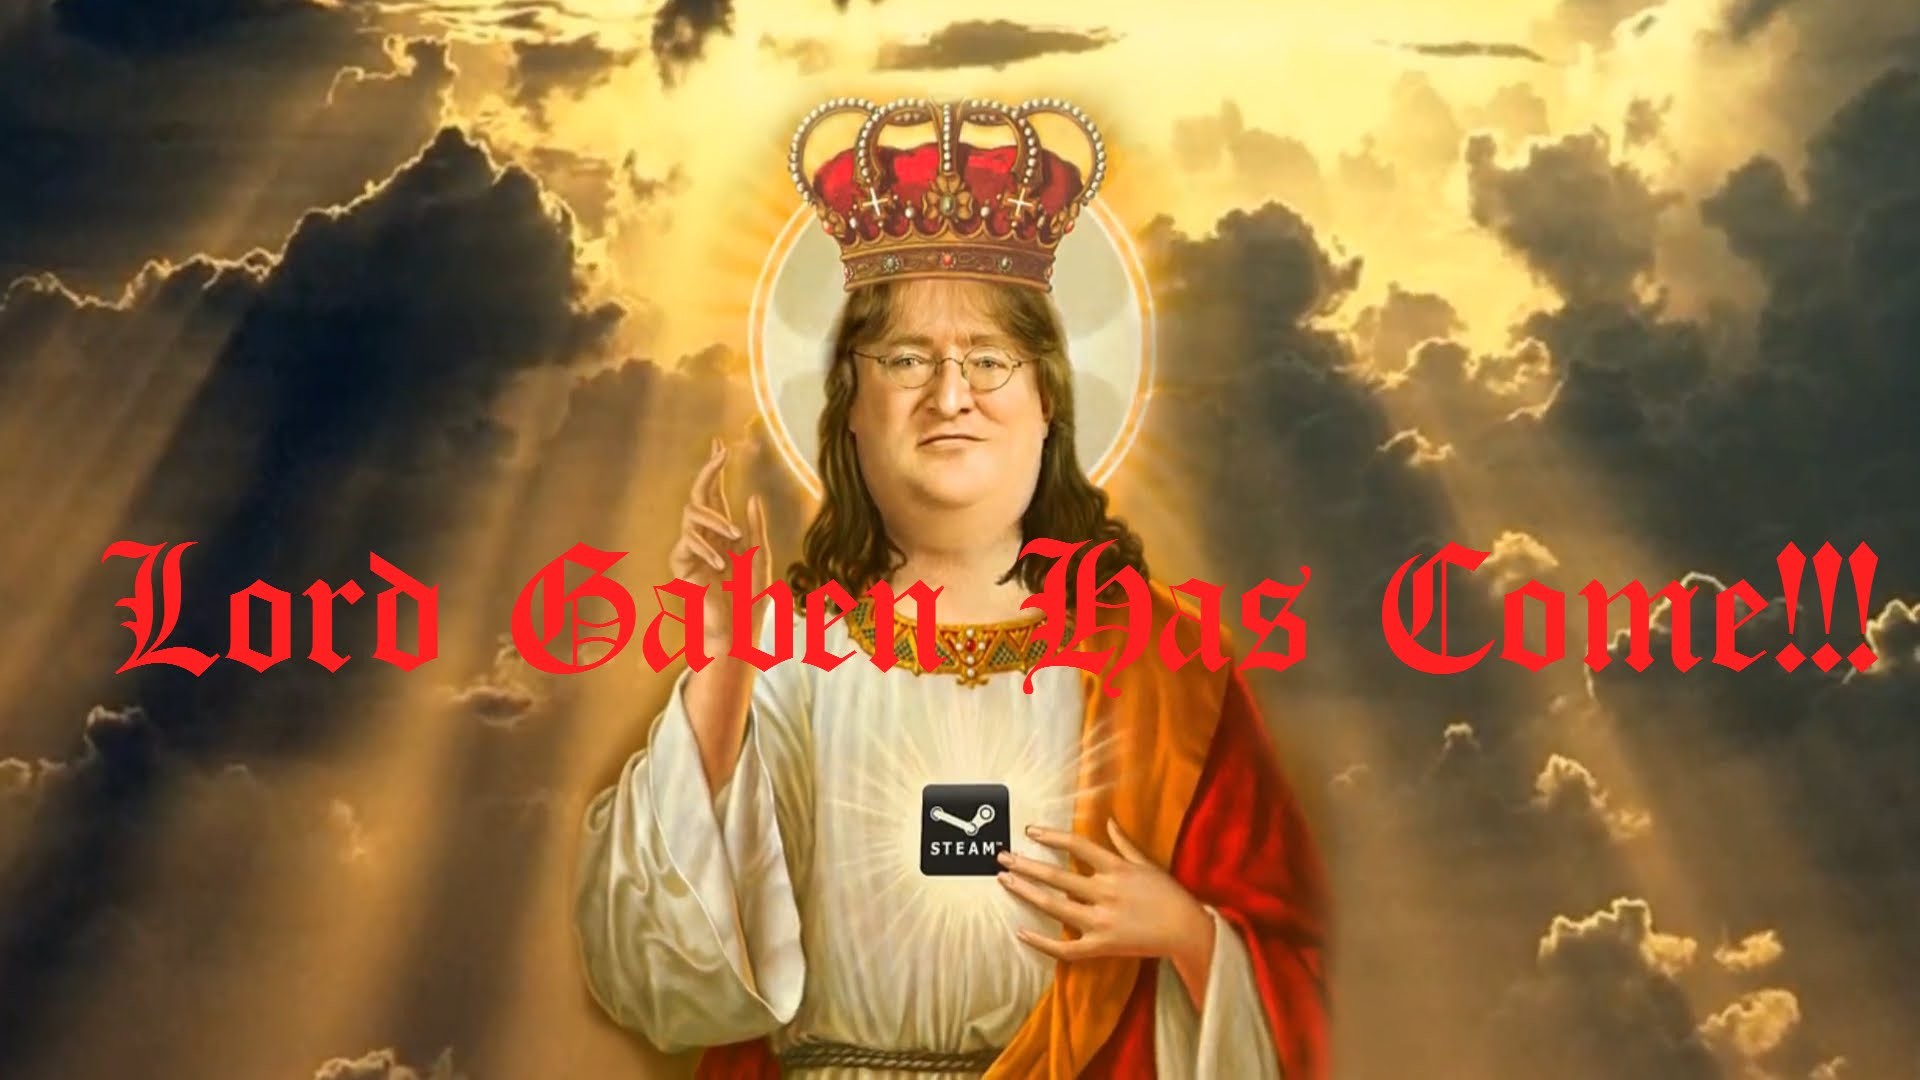 1920x1080 Lord Gaben Has GAVE ME THE POWER! - To 420 Blazit